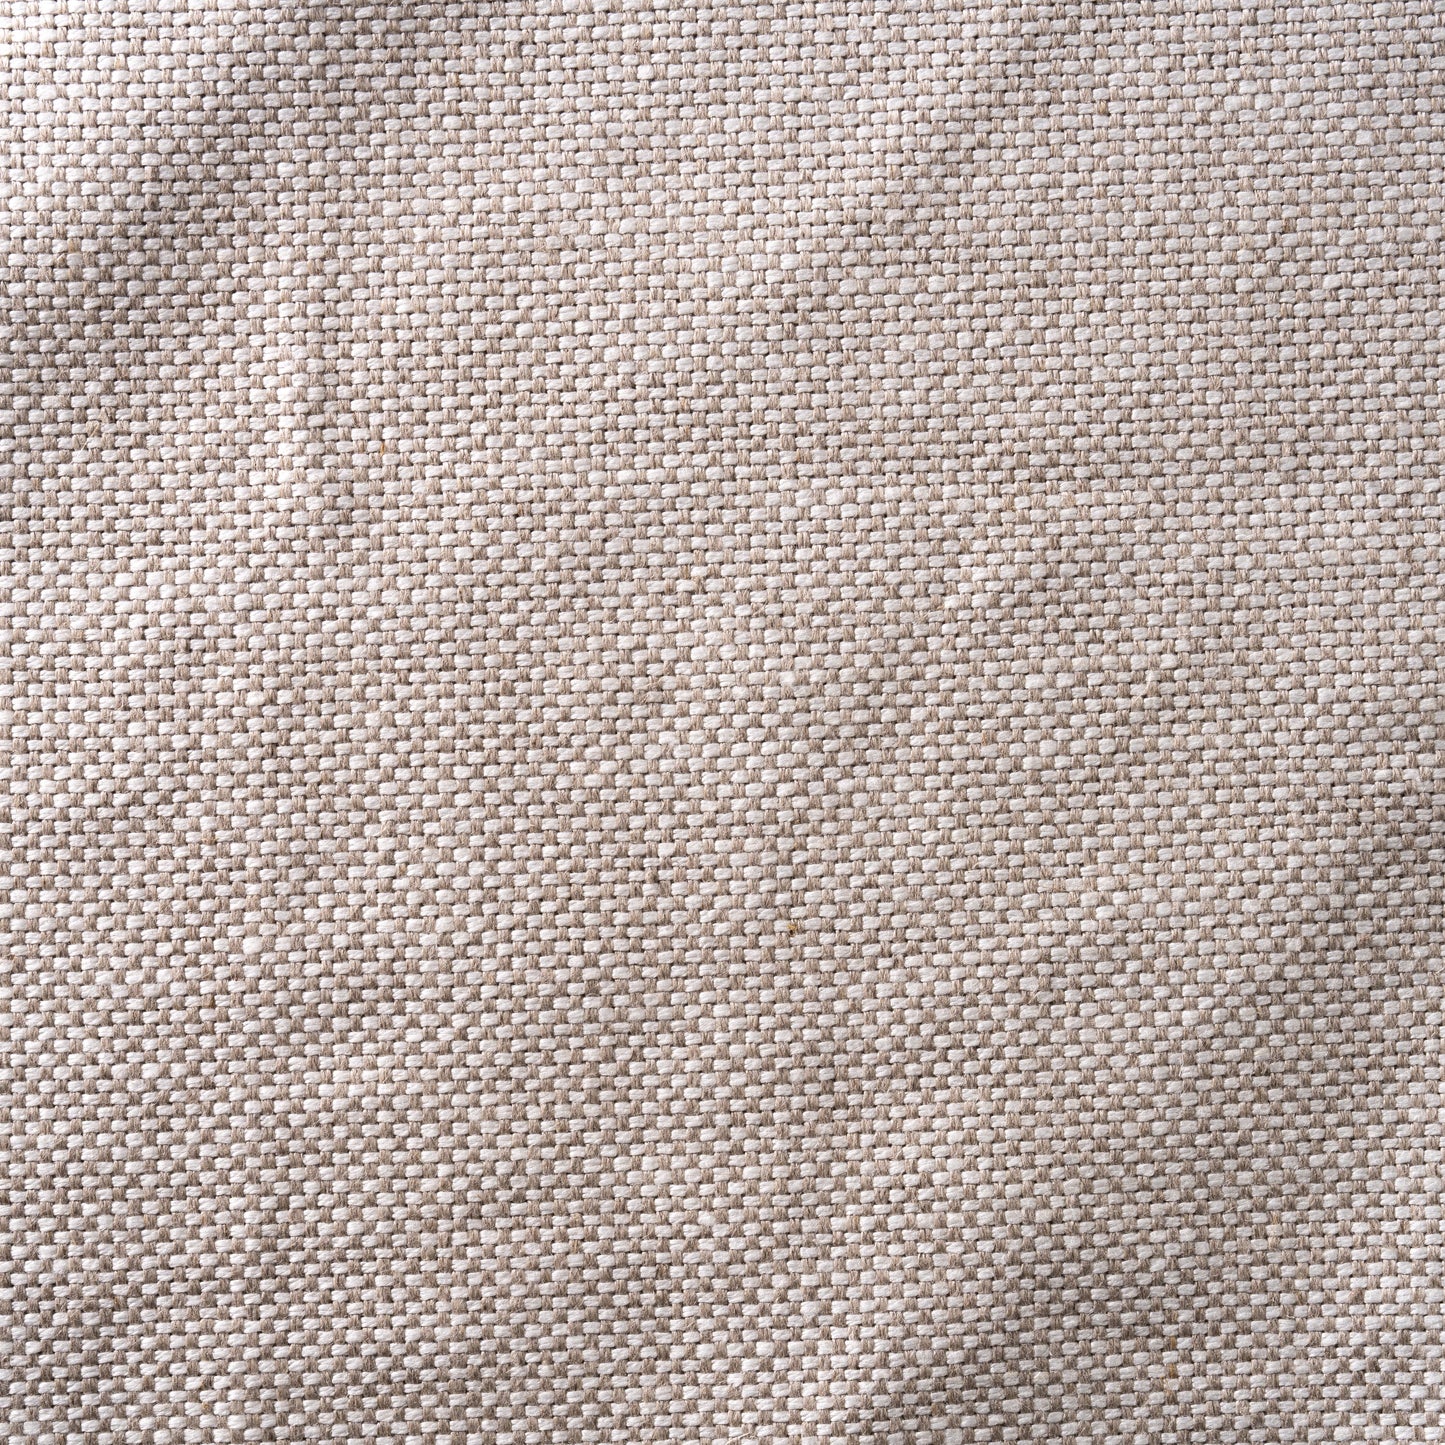 14.5 oz/sq yard 100% Upholstery Weight Linen in Mixed Natural